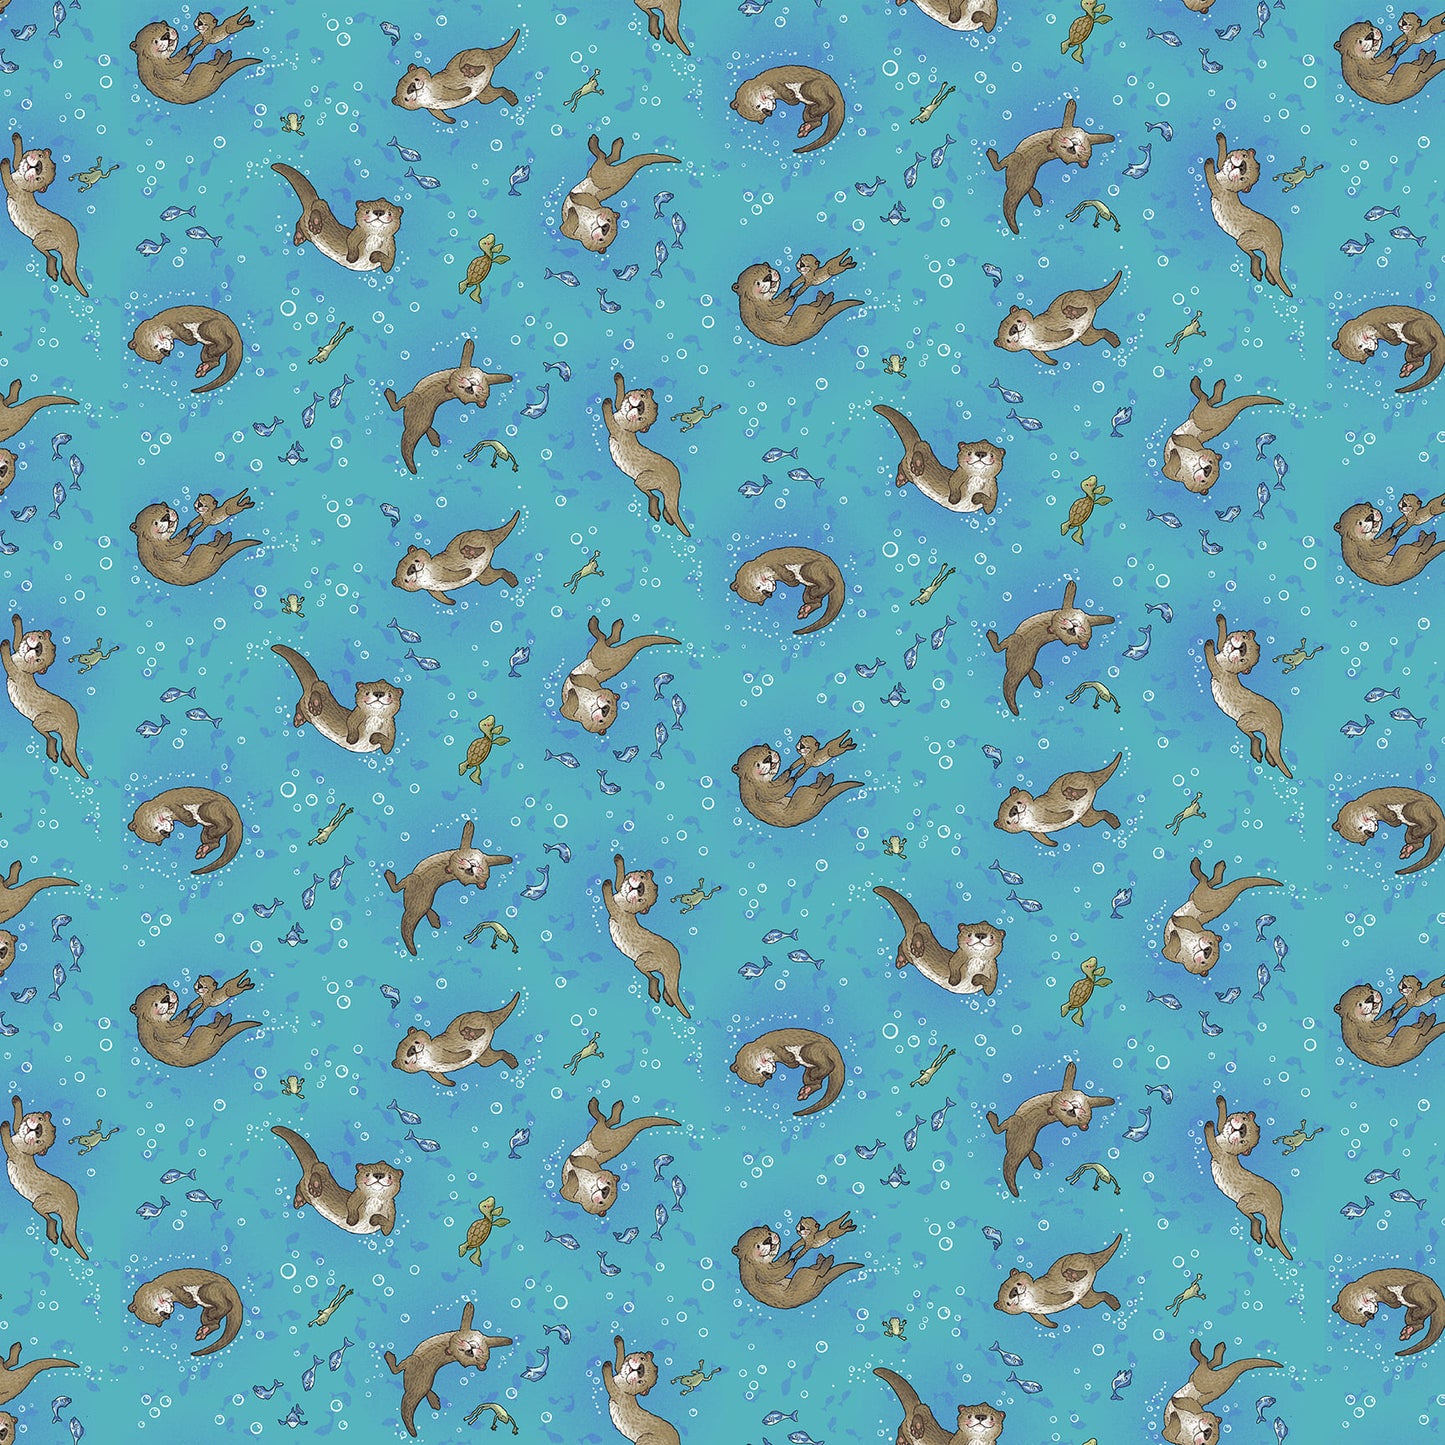 River Romp Underwater Otters Fabric - By the yard